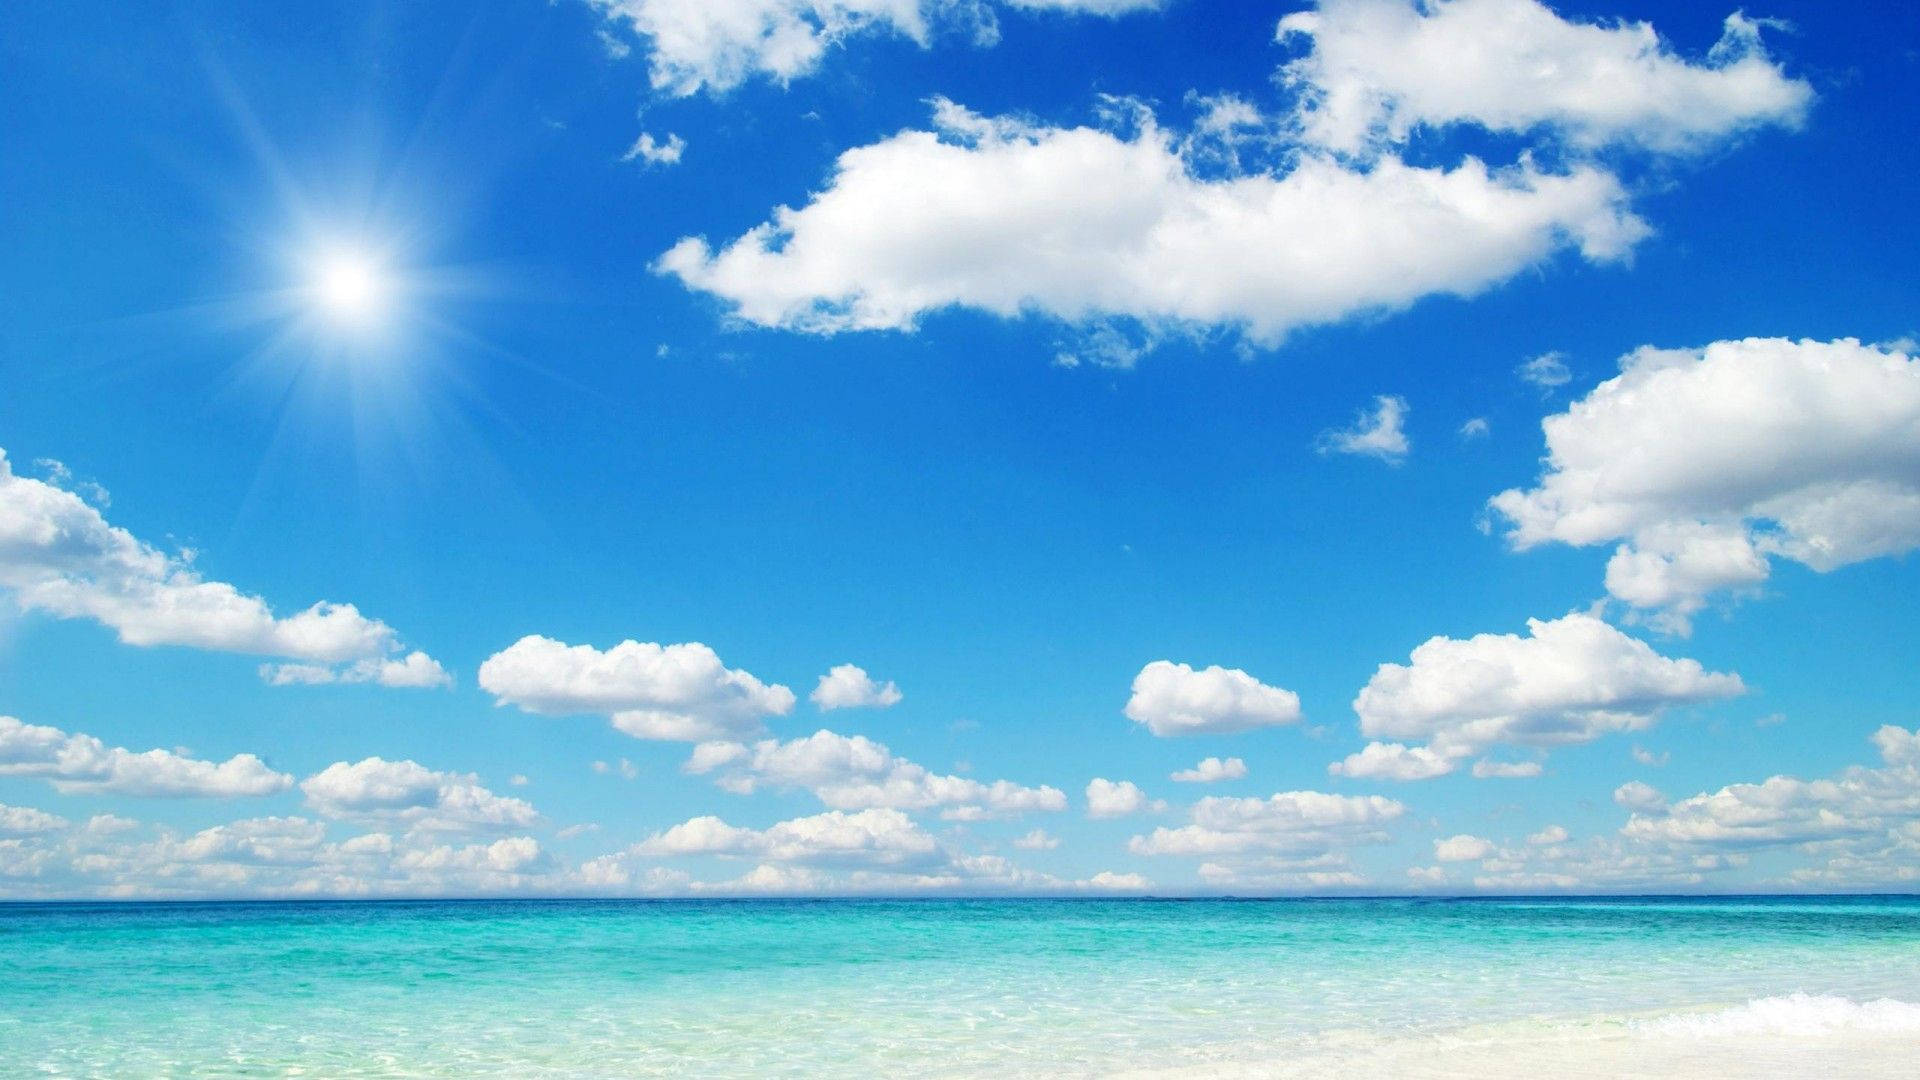 Free Blue Sky Wallpaper Downloads, [1300+] Blue Sky Wallpapers for FREE |  